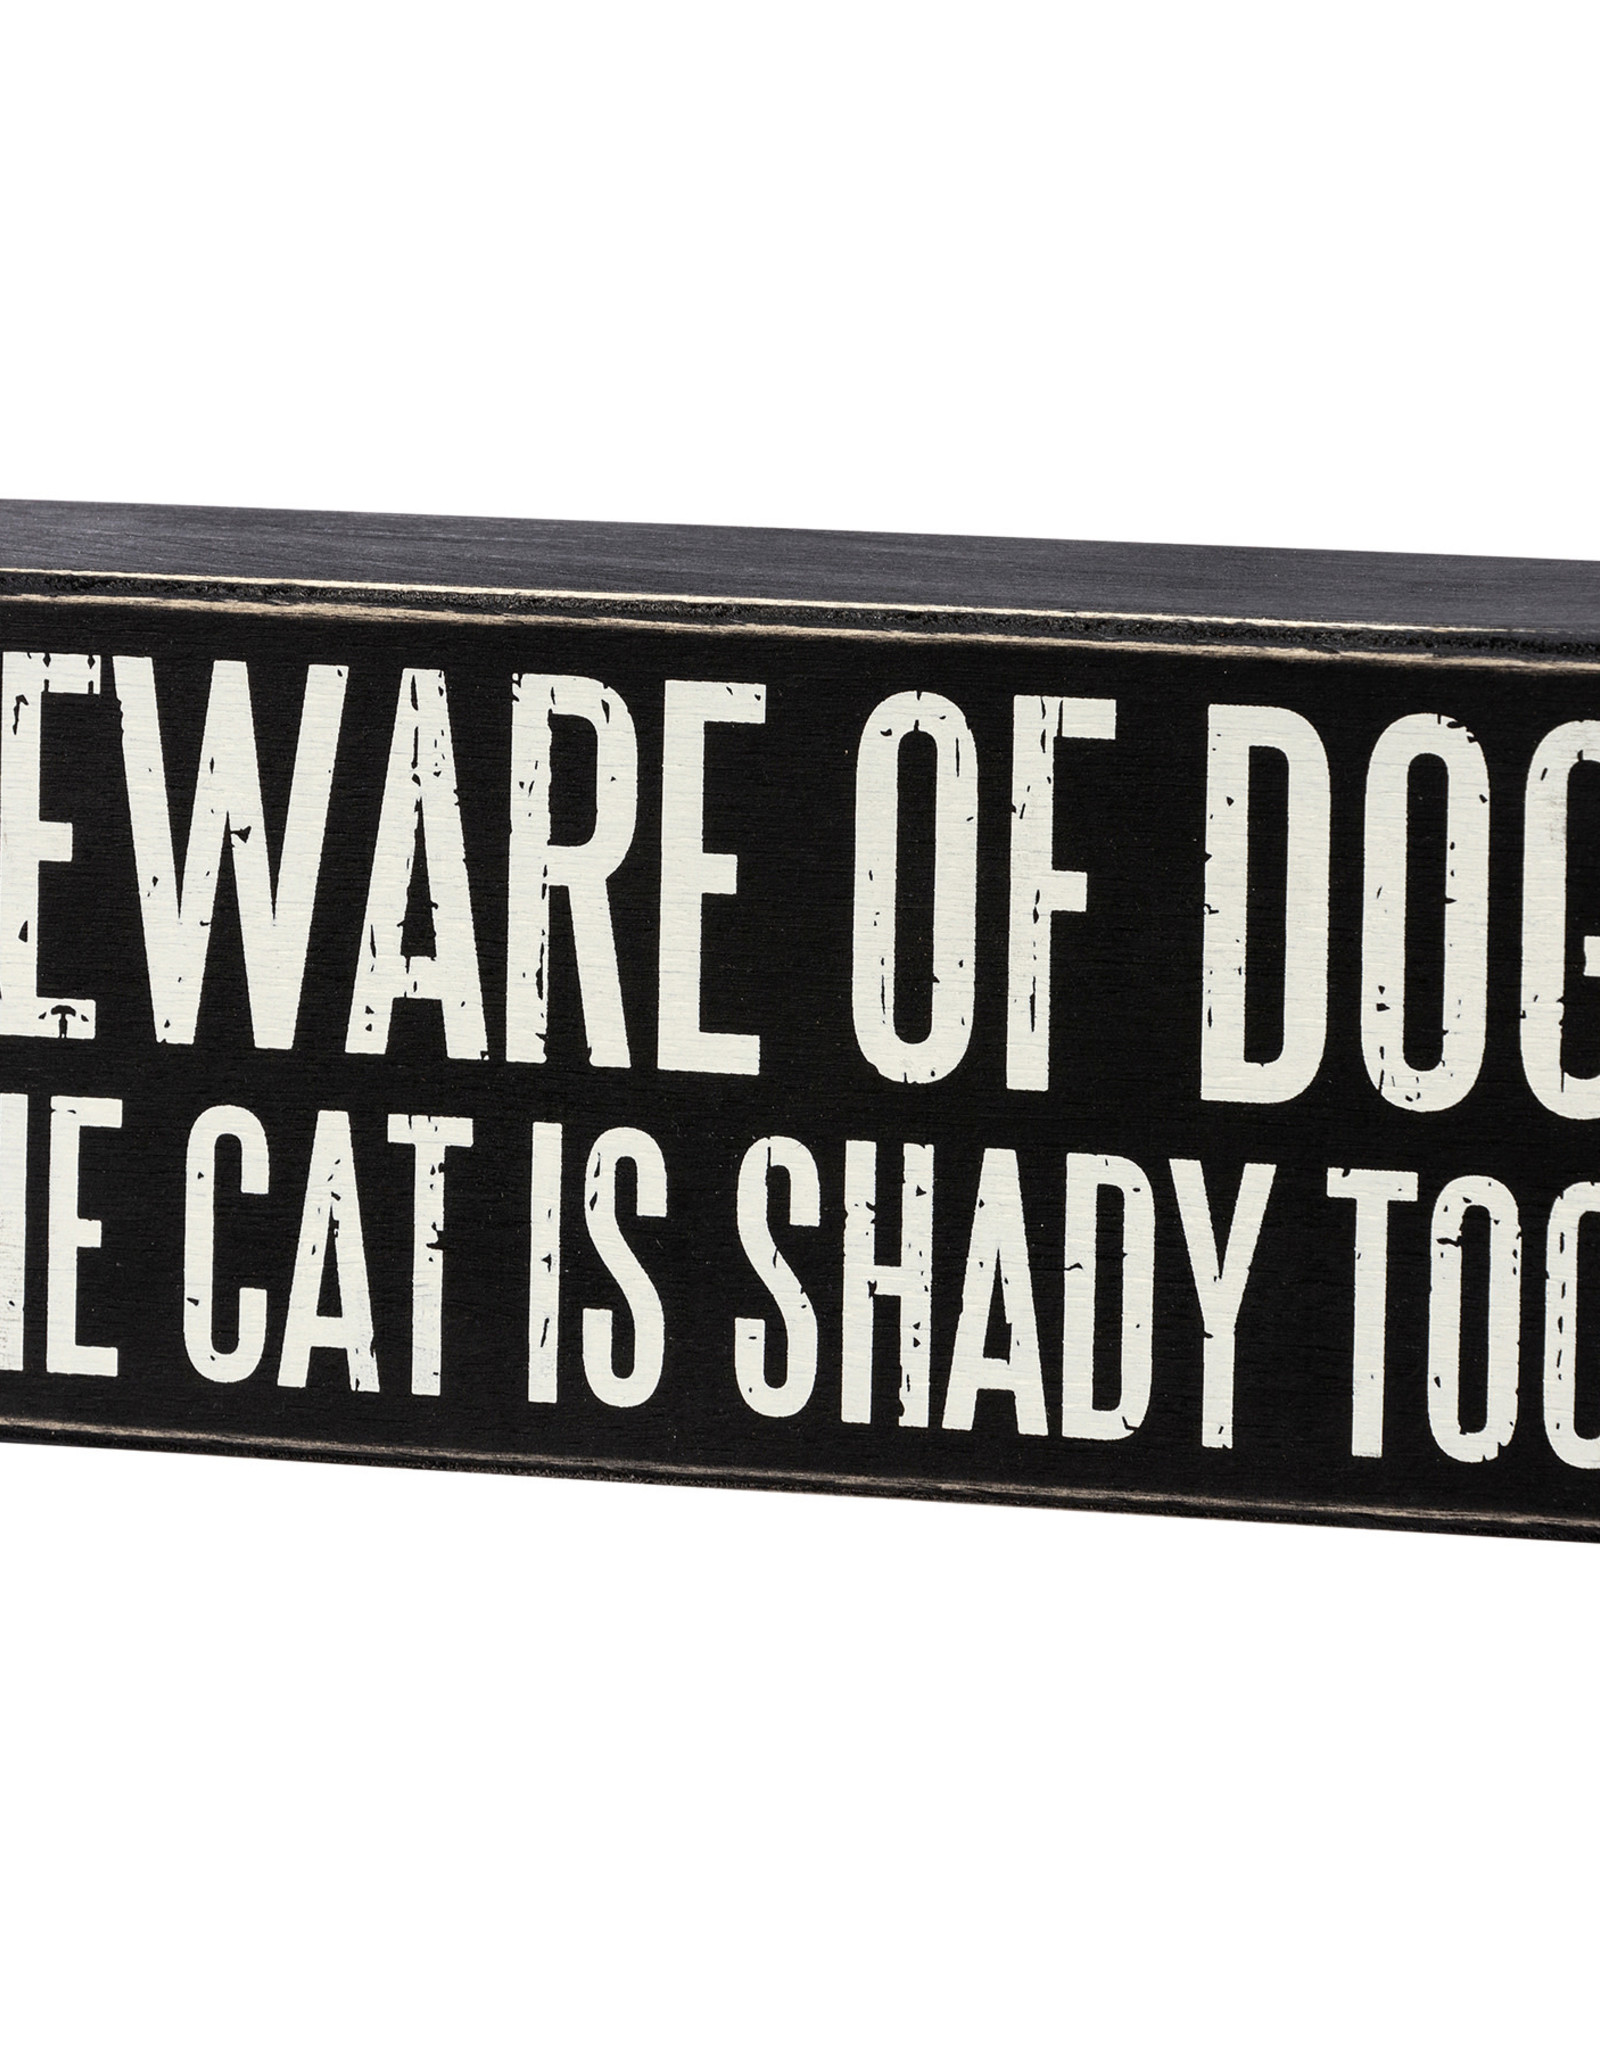 Box Sign - Beware Of Dog The Cat Is Shady Too